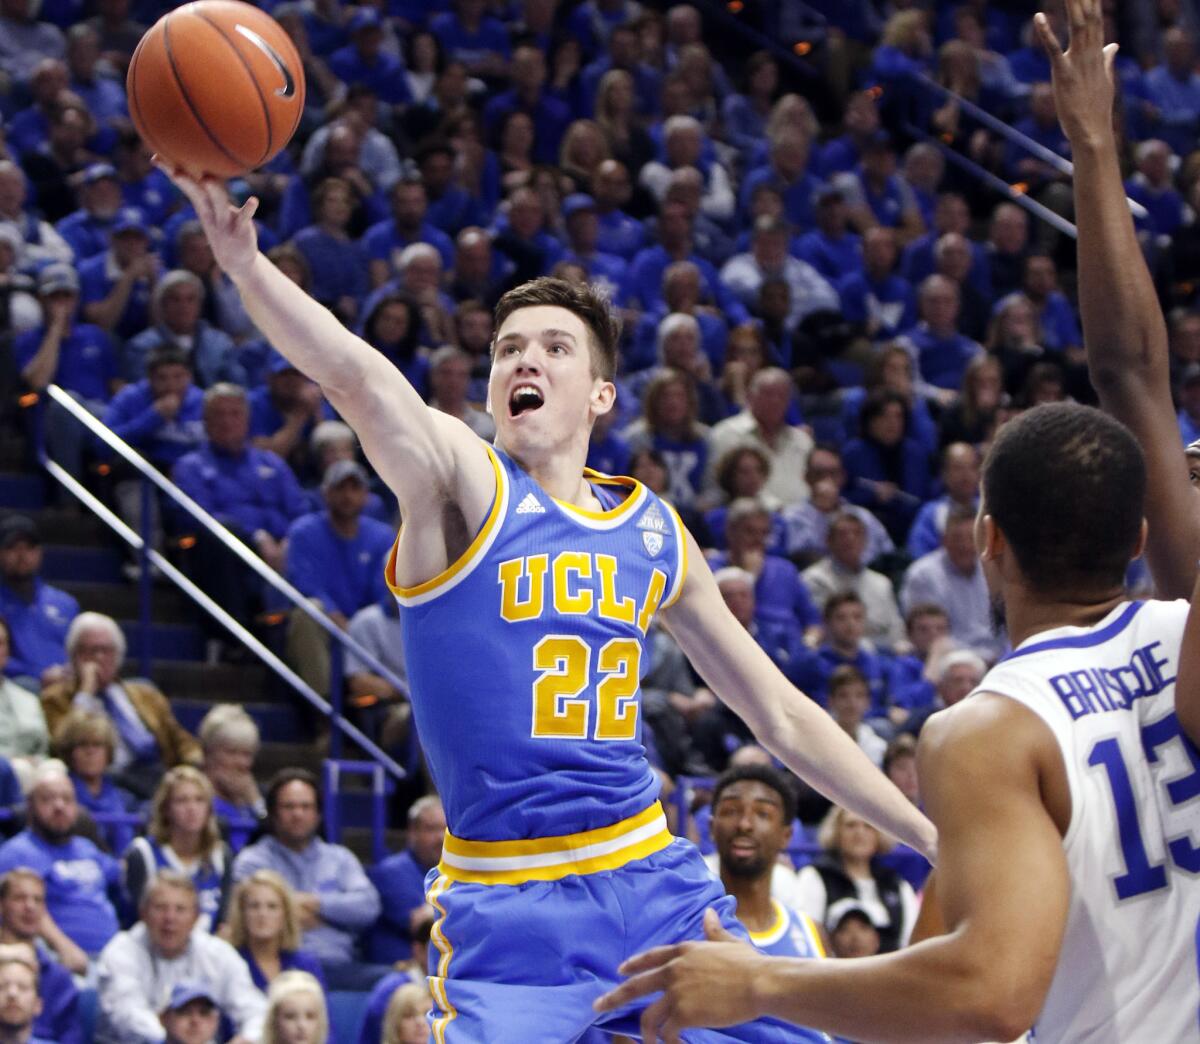 UCLA's TJ Leaf shoots near Kentucky's Isaiah Briscoe during the second half on Dec. 3.